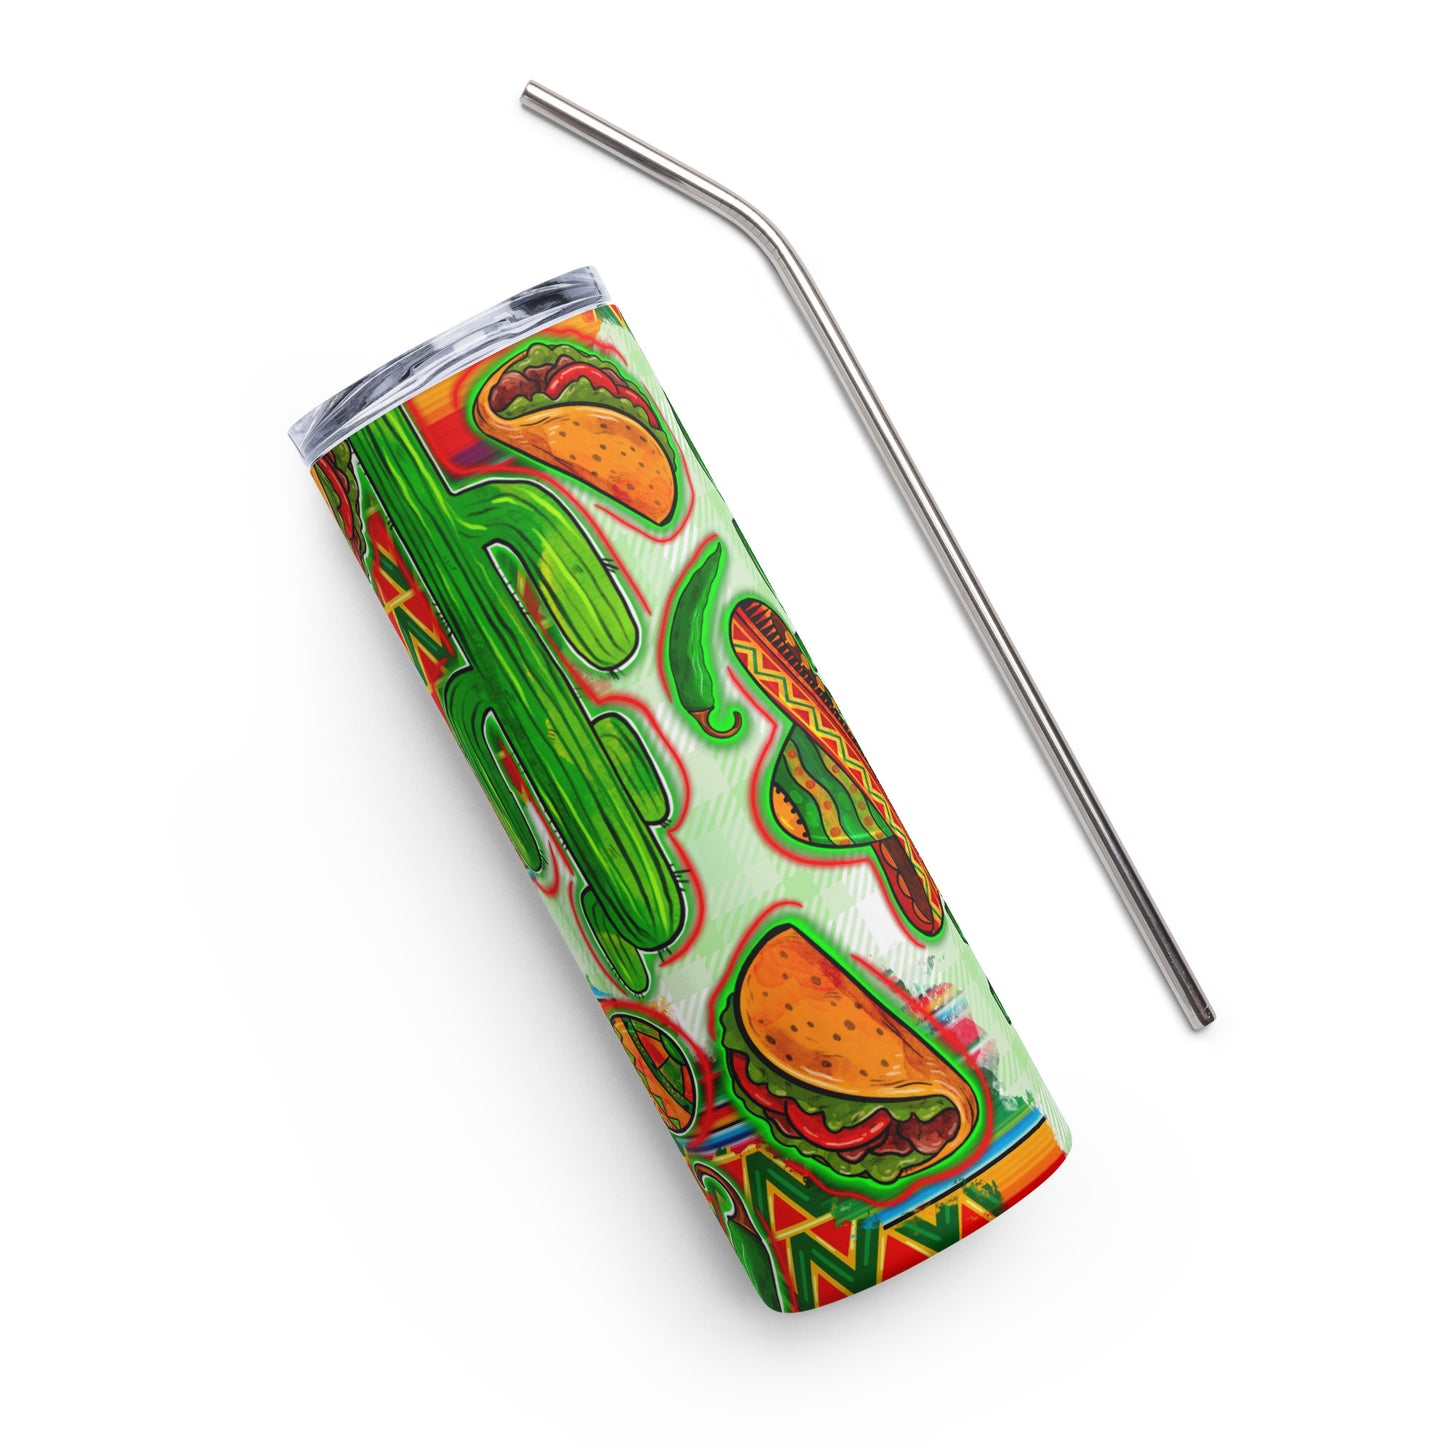 Mexico Vibes Stainless steel tumbler